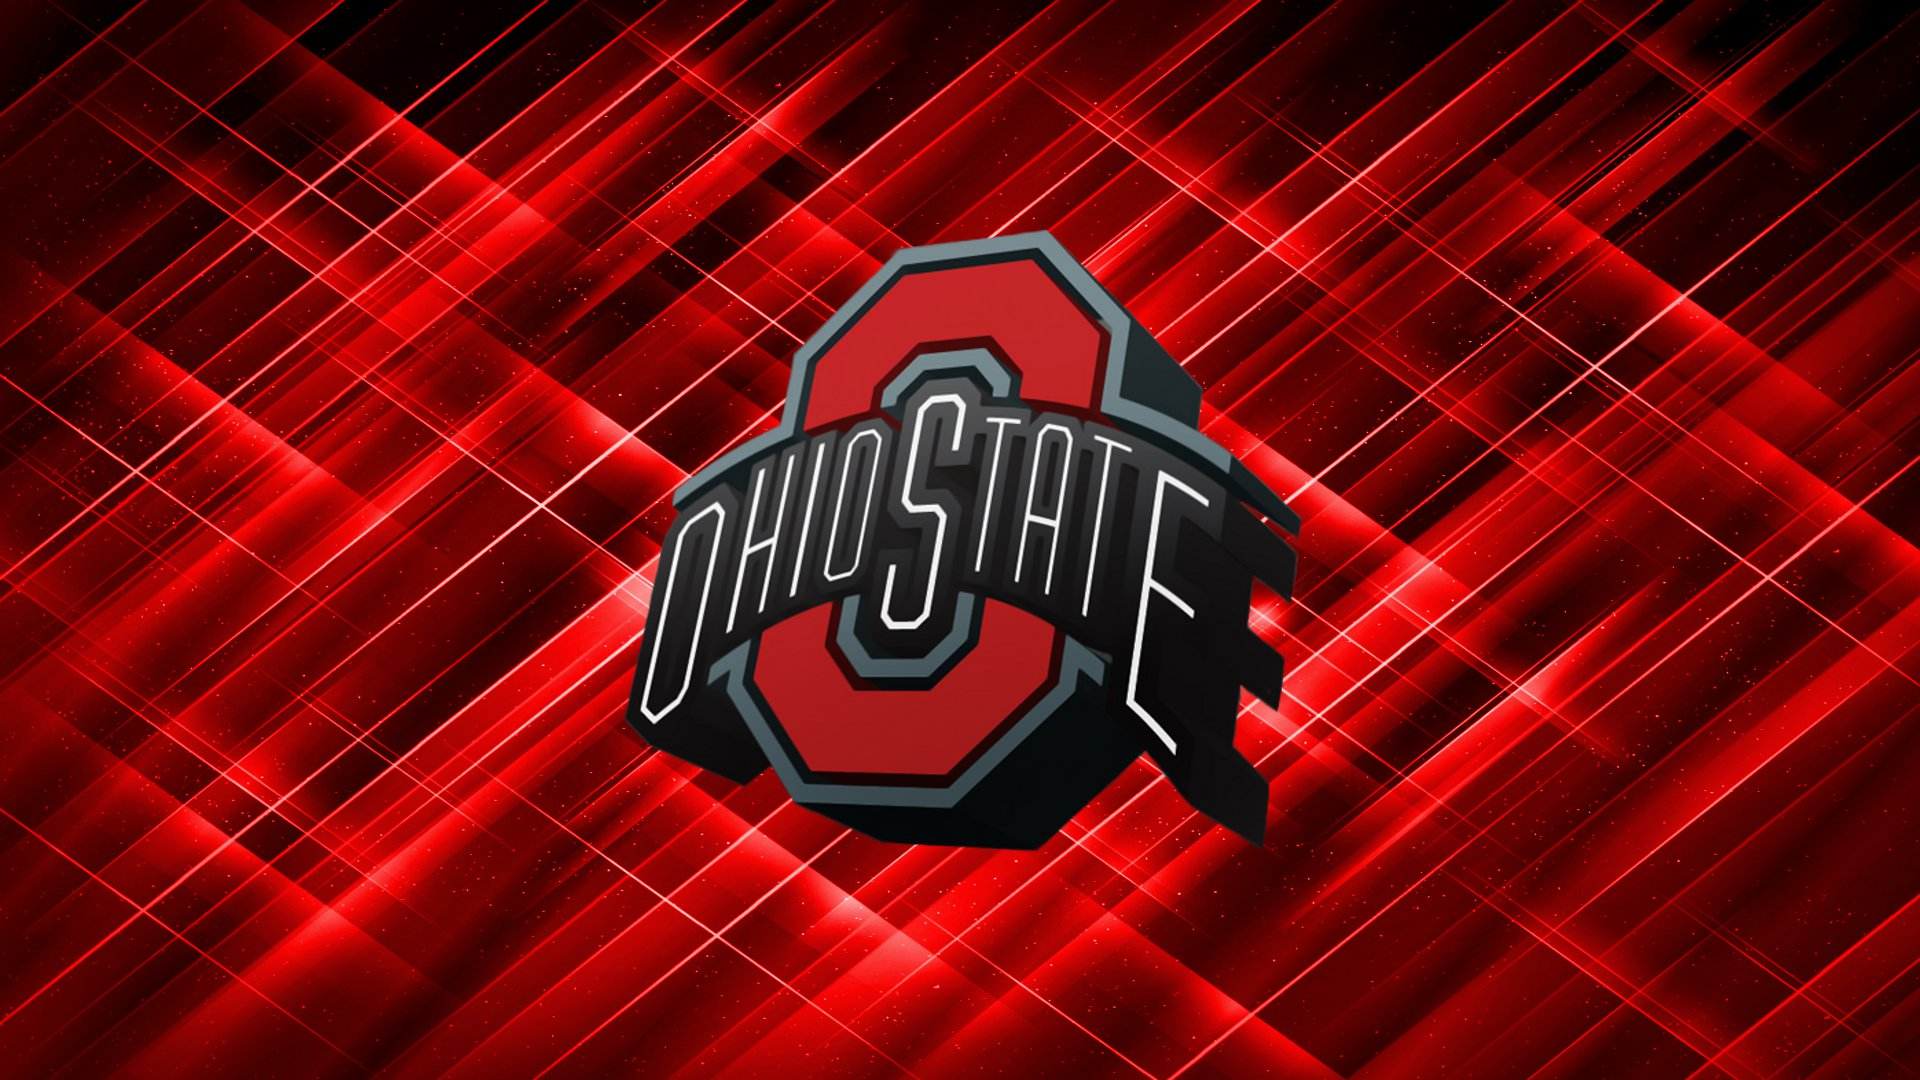 1920x1080 Free download Ohio State Football images OSU Wallpaper 12 HD wallpaper [] for your Desktop, Mobile \u0026 Tablet | Explore 76+ Ohio State Football Backgrounds | Ohio State University Wallpaper